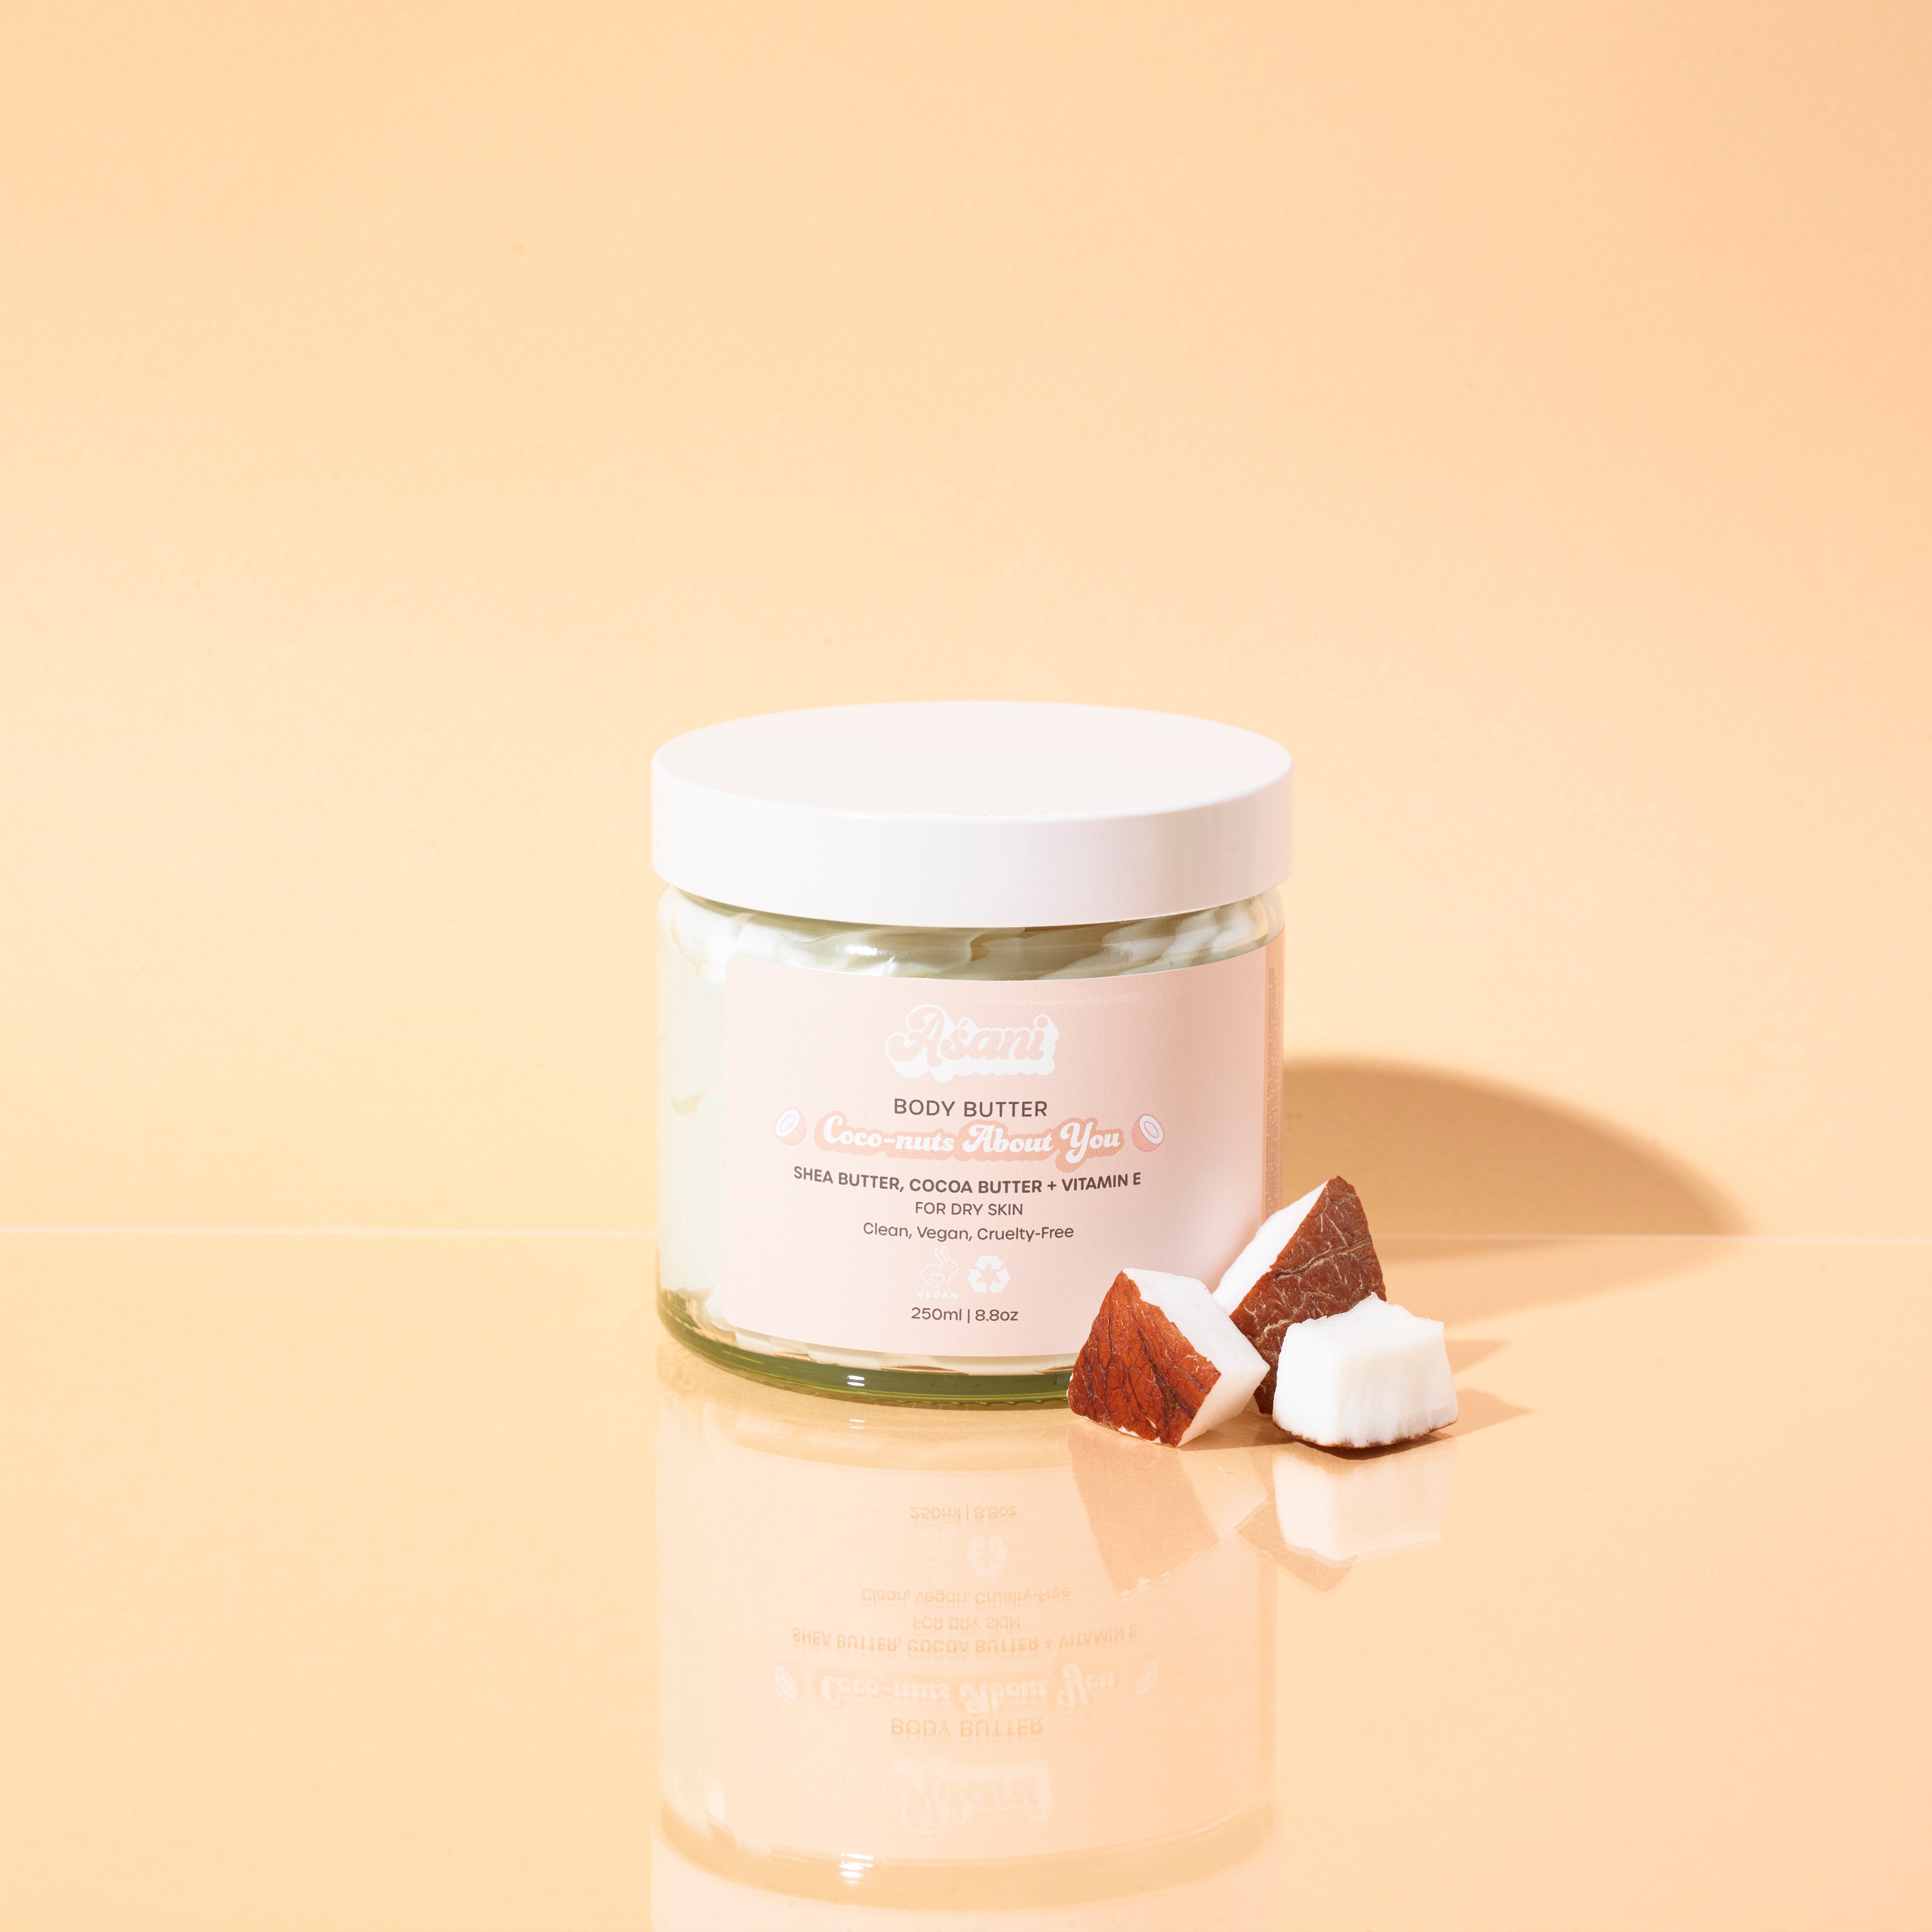 Coco-nuts About You Body Butter